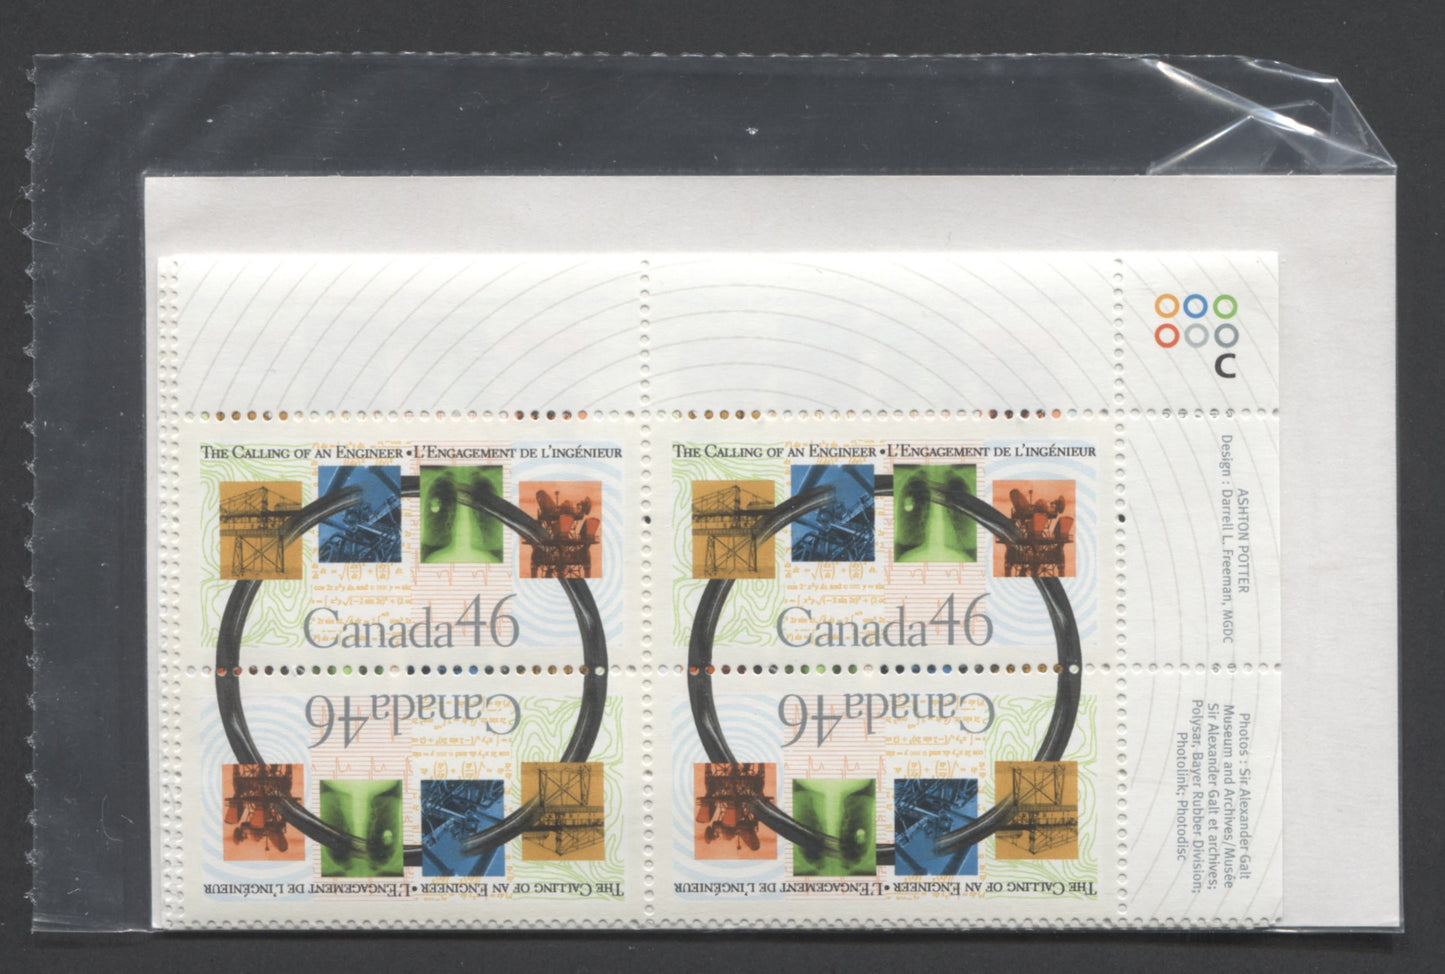 Lot 358 Canada #1848 46c Multicolored Engineering Achievements 2000 The Calling  Of An Engineer, Canada Post Sealed Pack of Inscription Blocks on TRC Paper With HB Type 8A Insert Card, VFNH, Unitrade Cat. $20